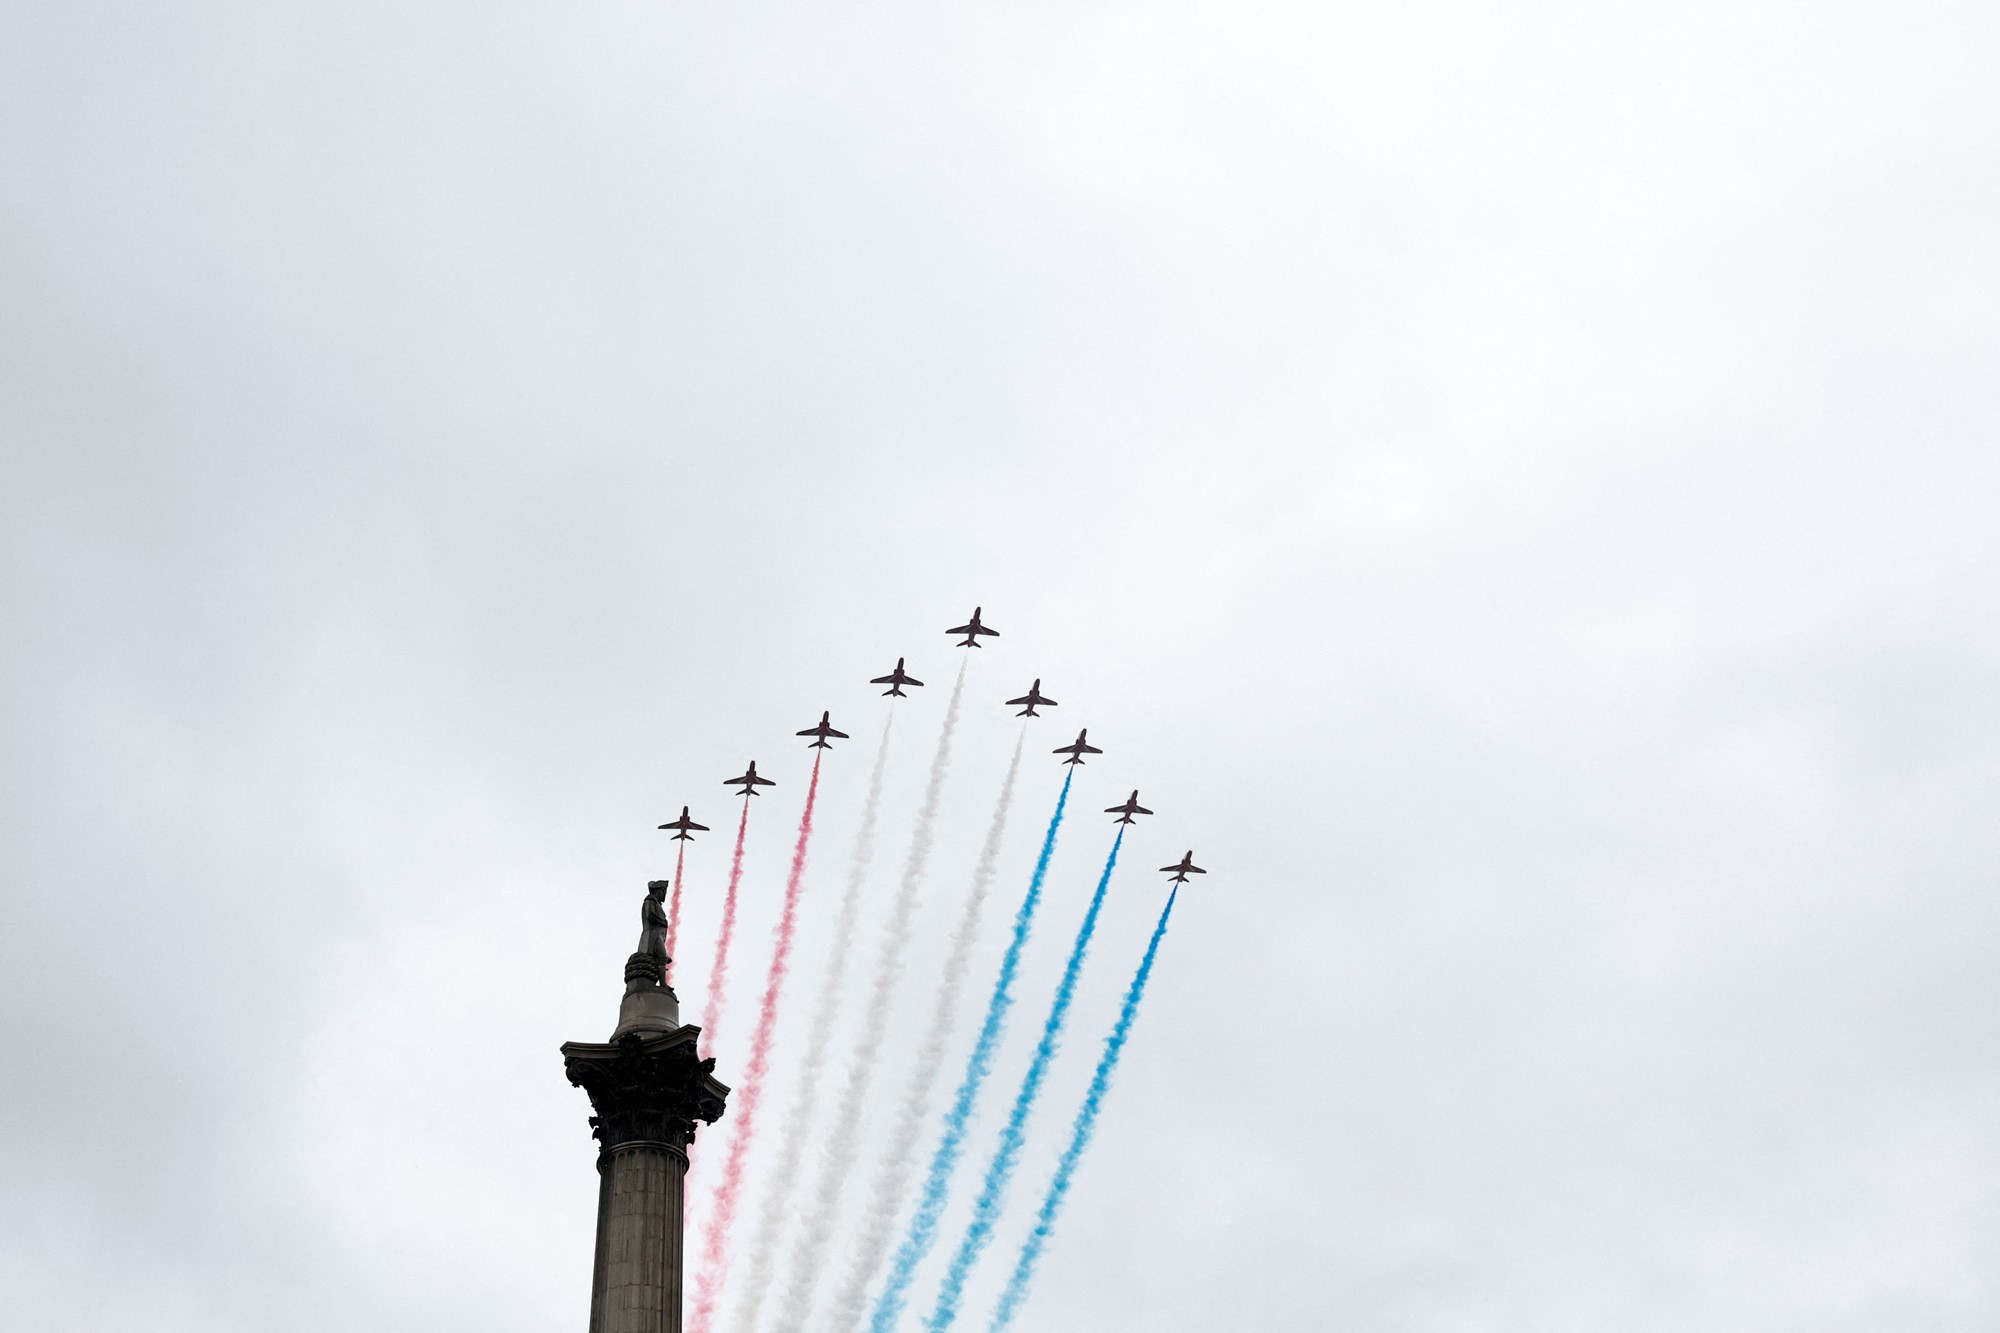 Jets with red, white and blue smoke fly through the air.